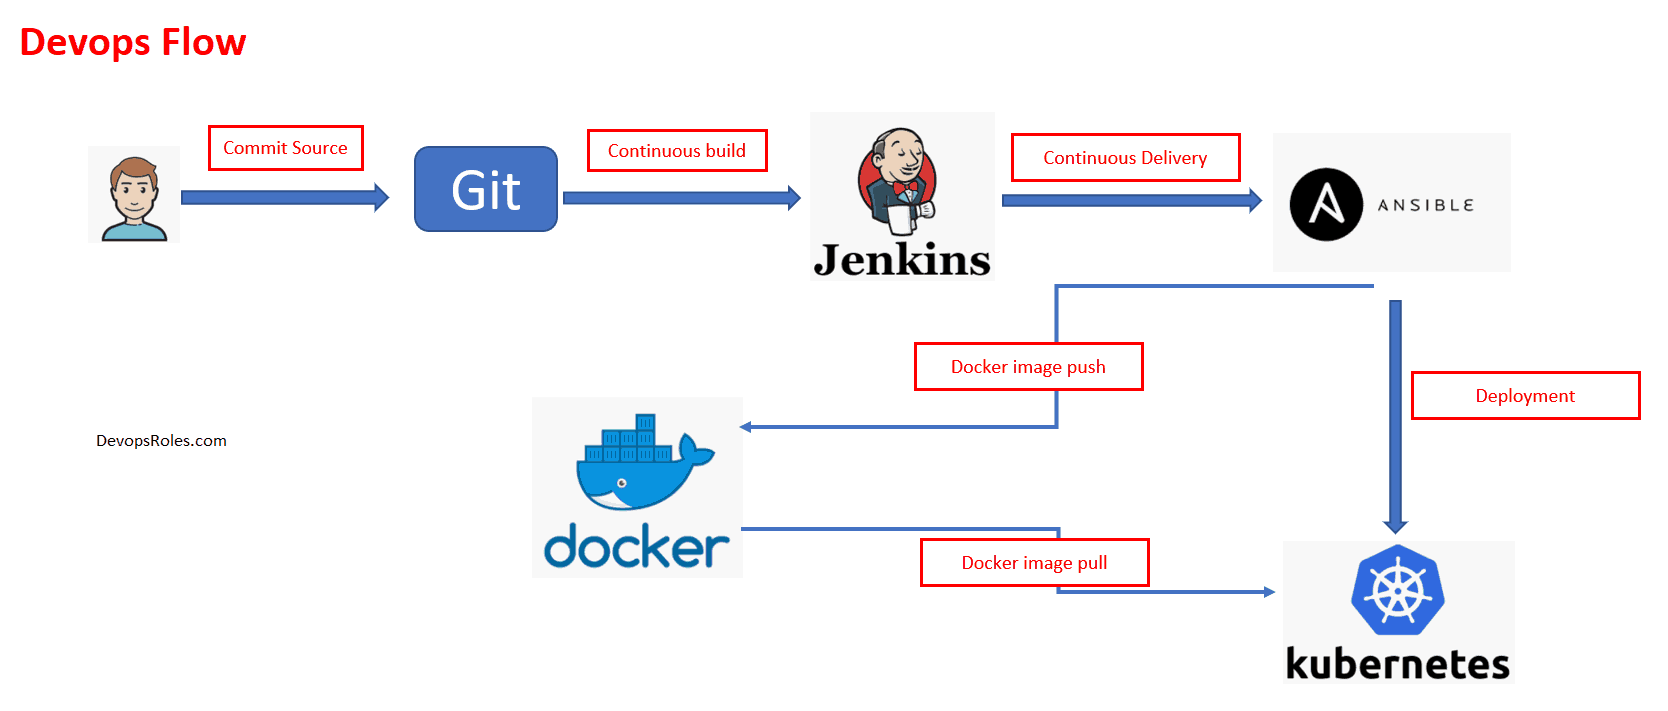 Integrating ansible with jenkins in a ci/cd process